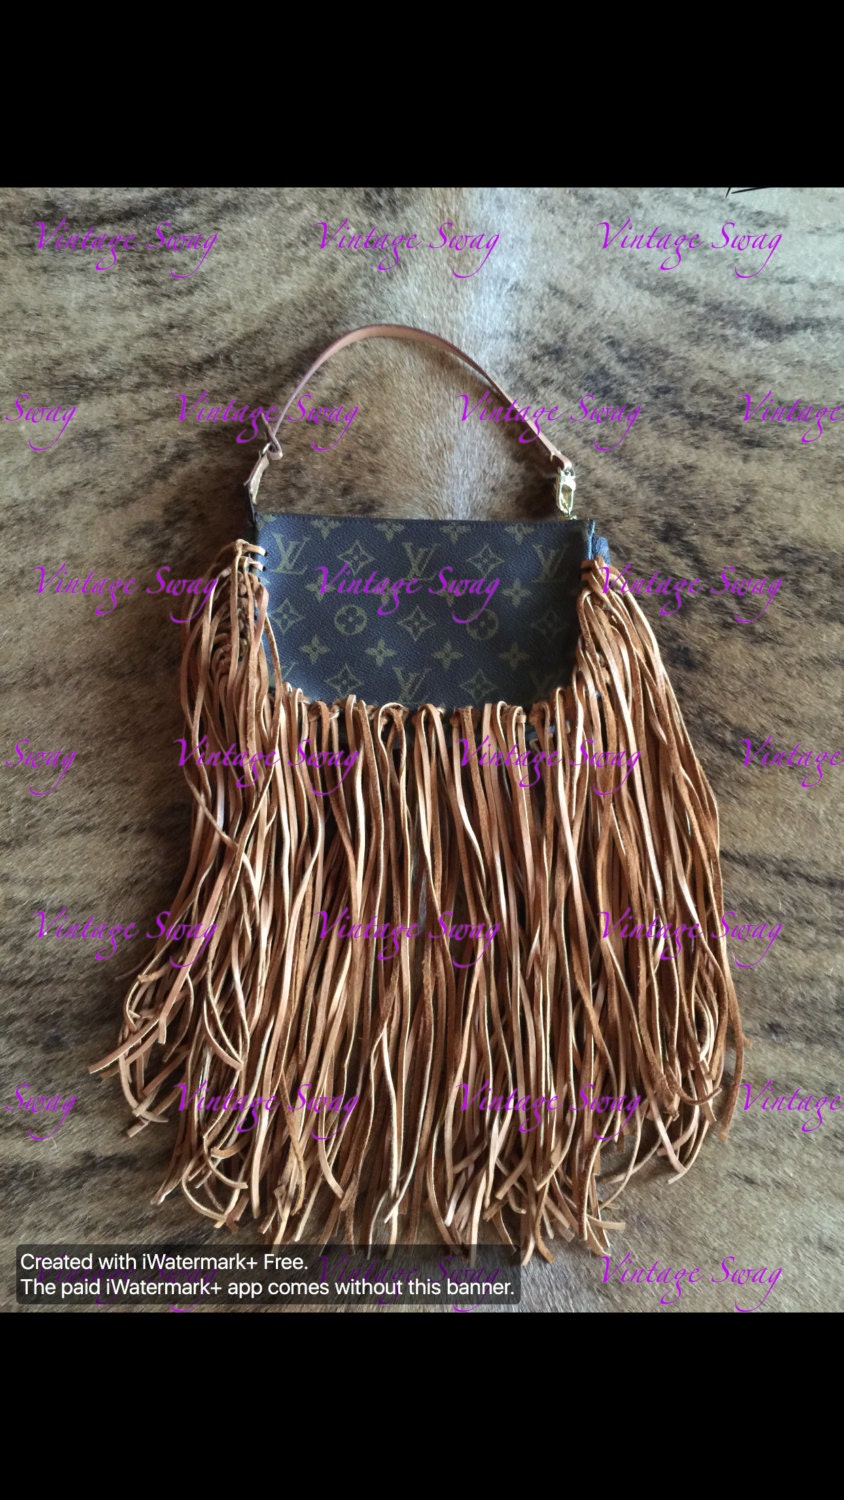 Vintage Swag FRINGED Louis Vuitton Pochette by VintageSwagCo